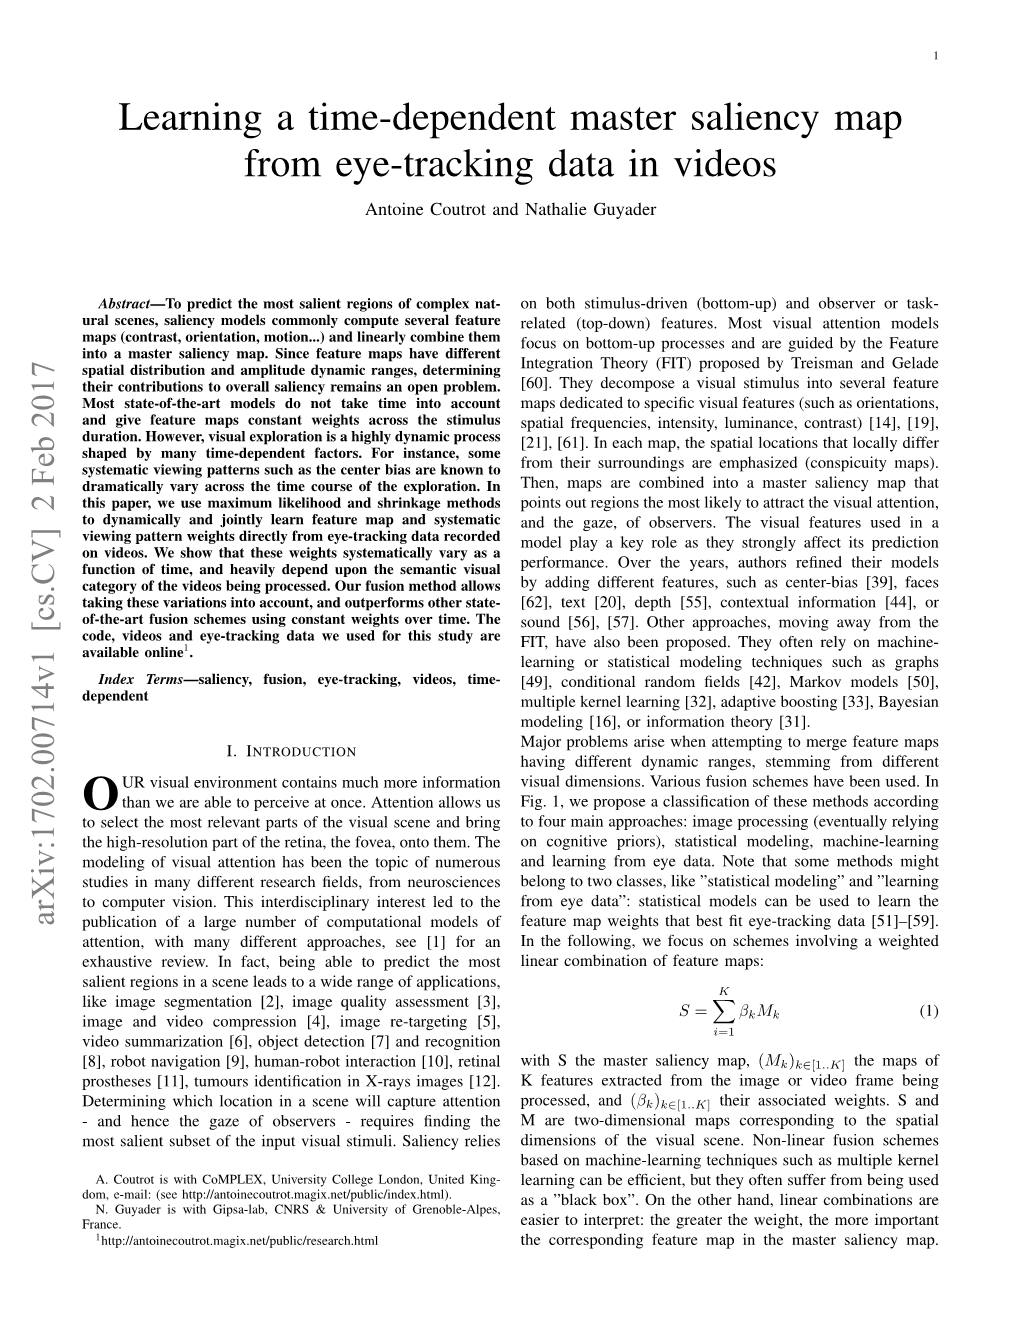 Learning a Time-Dependent Master Saliency Map from Eye-Tracking Data in Videos Antoine Coutrot and Nathalie Guyader